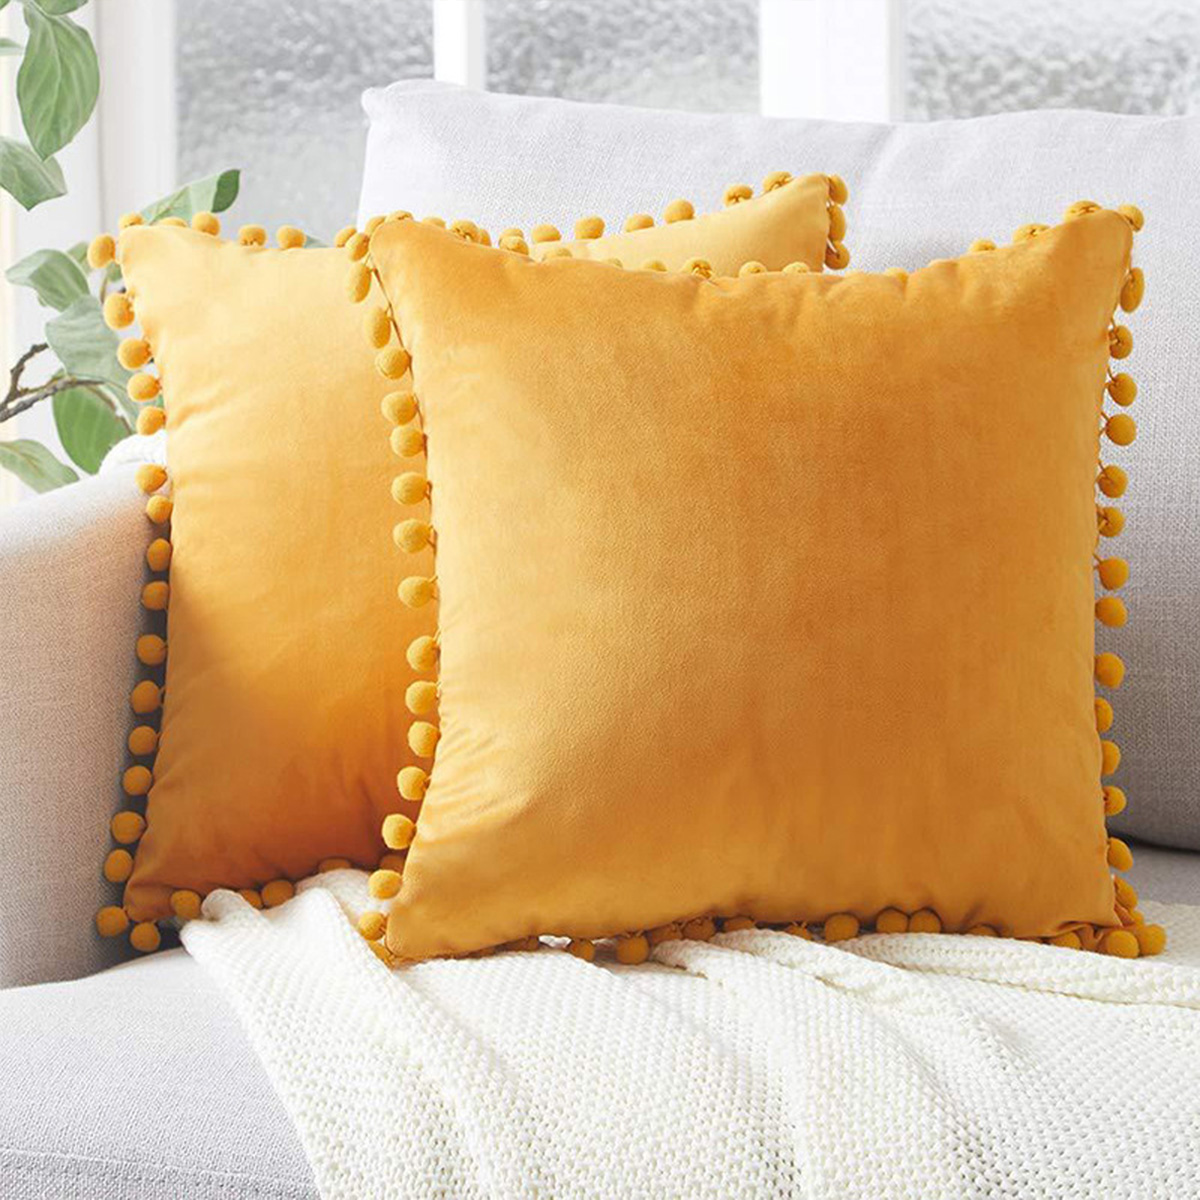 4545cm-Soft-Velvet-Pillow-Covers-Cute-Pom-Poms-Throw-Pillow-Covers-Square-Cushion-Case-for-Sofa-Couc-1779027-6